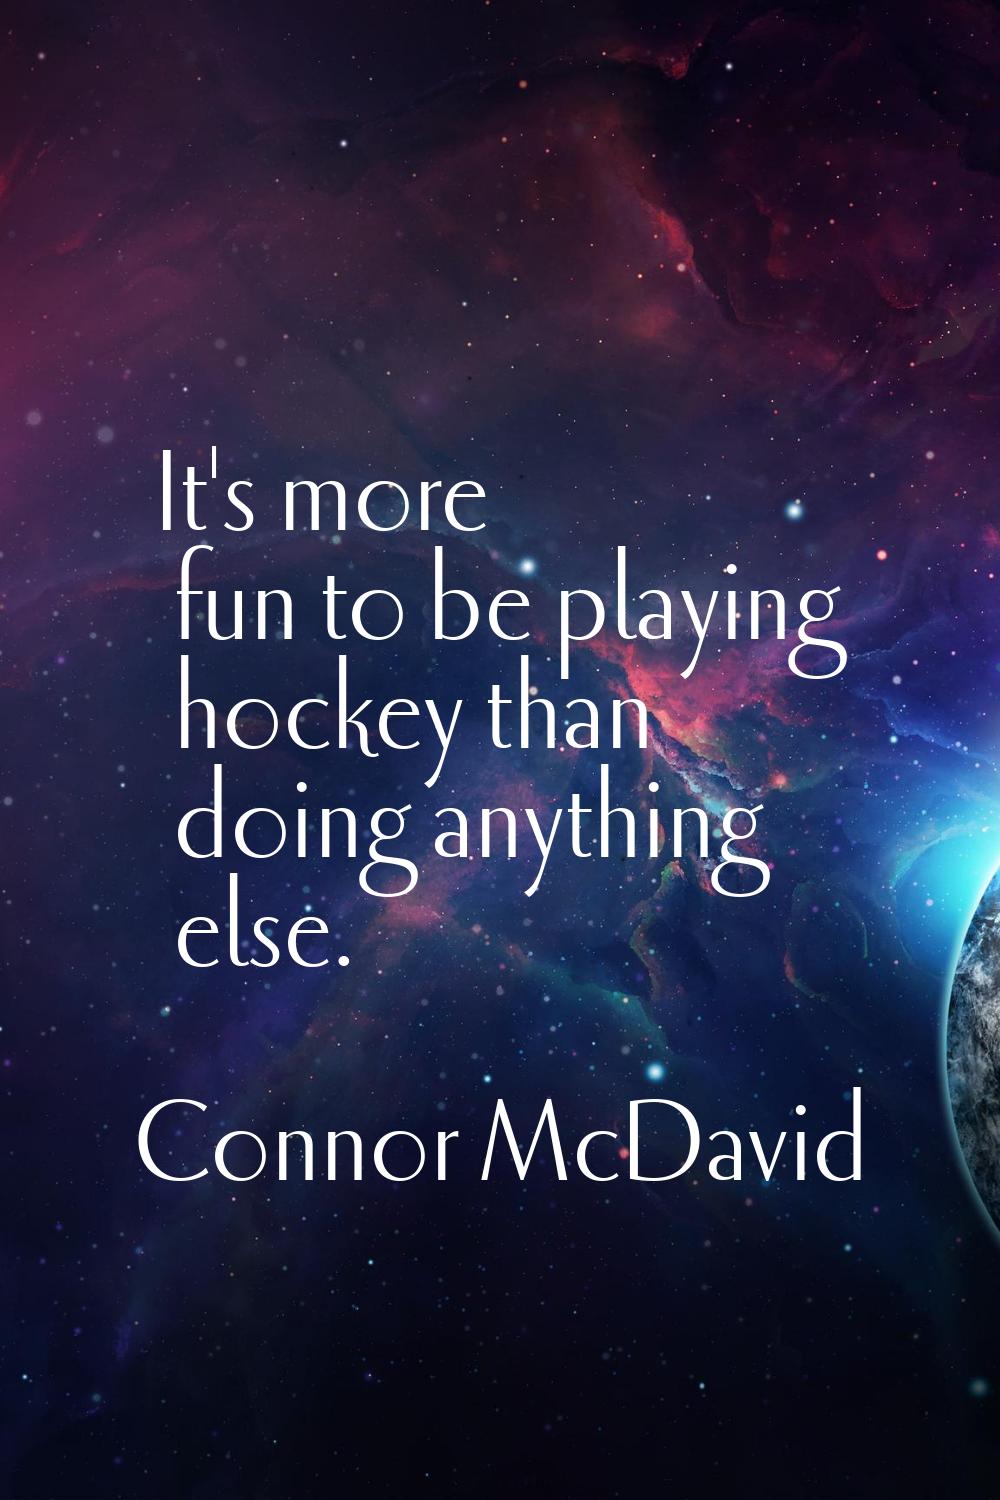 It's more fun to be playing hockey than doing anything else.